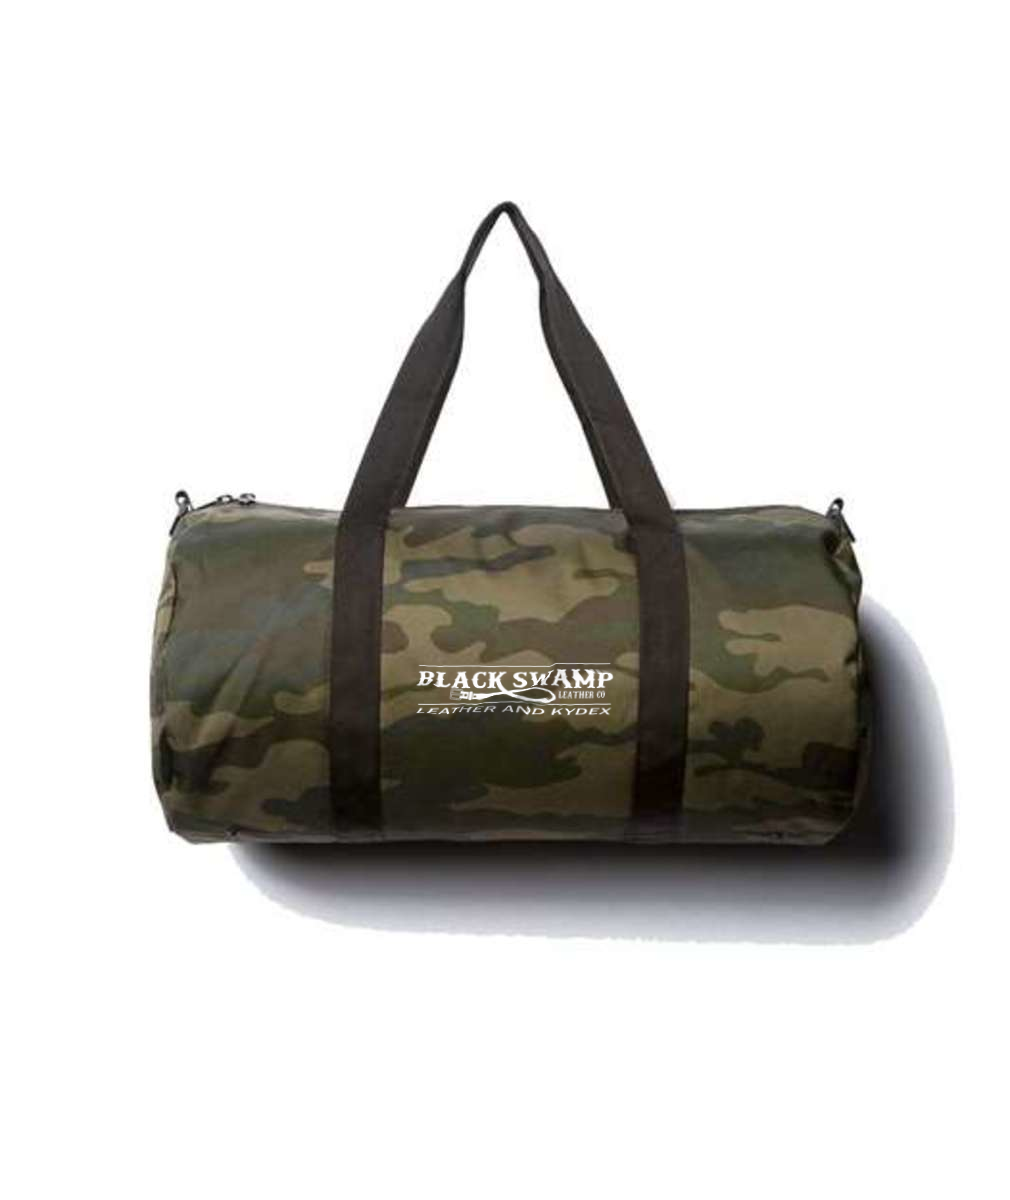 Independent Trading Co. - 29L Day Tripper Duffel Bag Embroidered with white thread - Black Swamp Leather Company